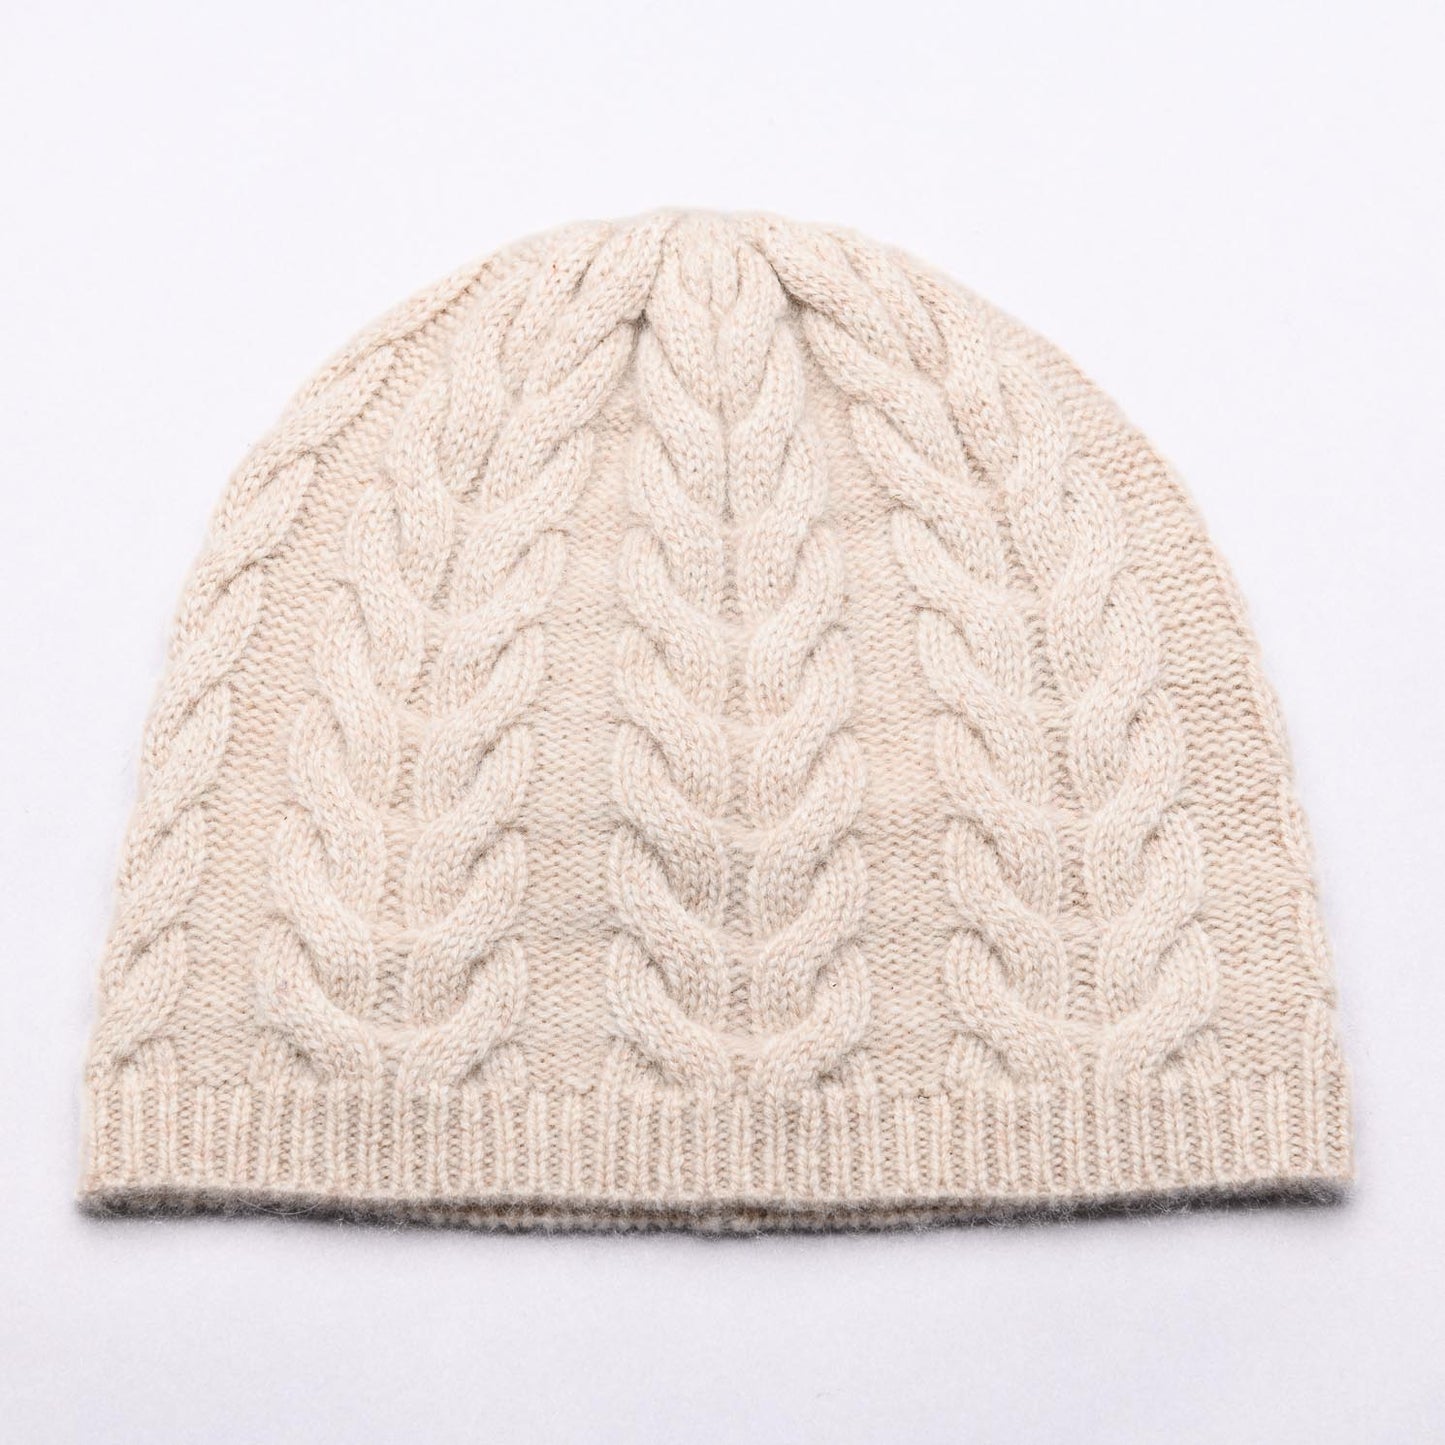 PERCY 100% Pure Cashmere Classic Cable Beanie, Crema